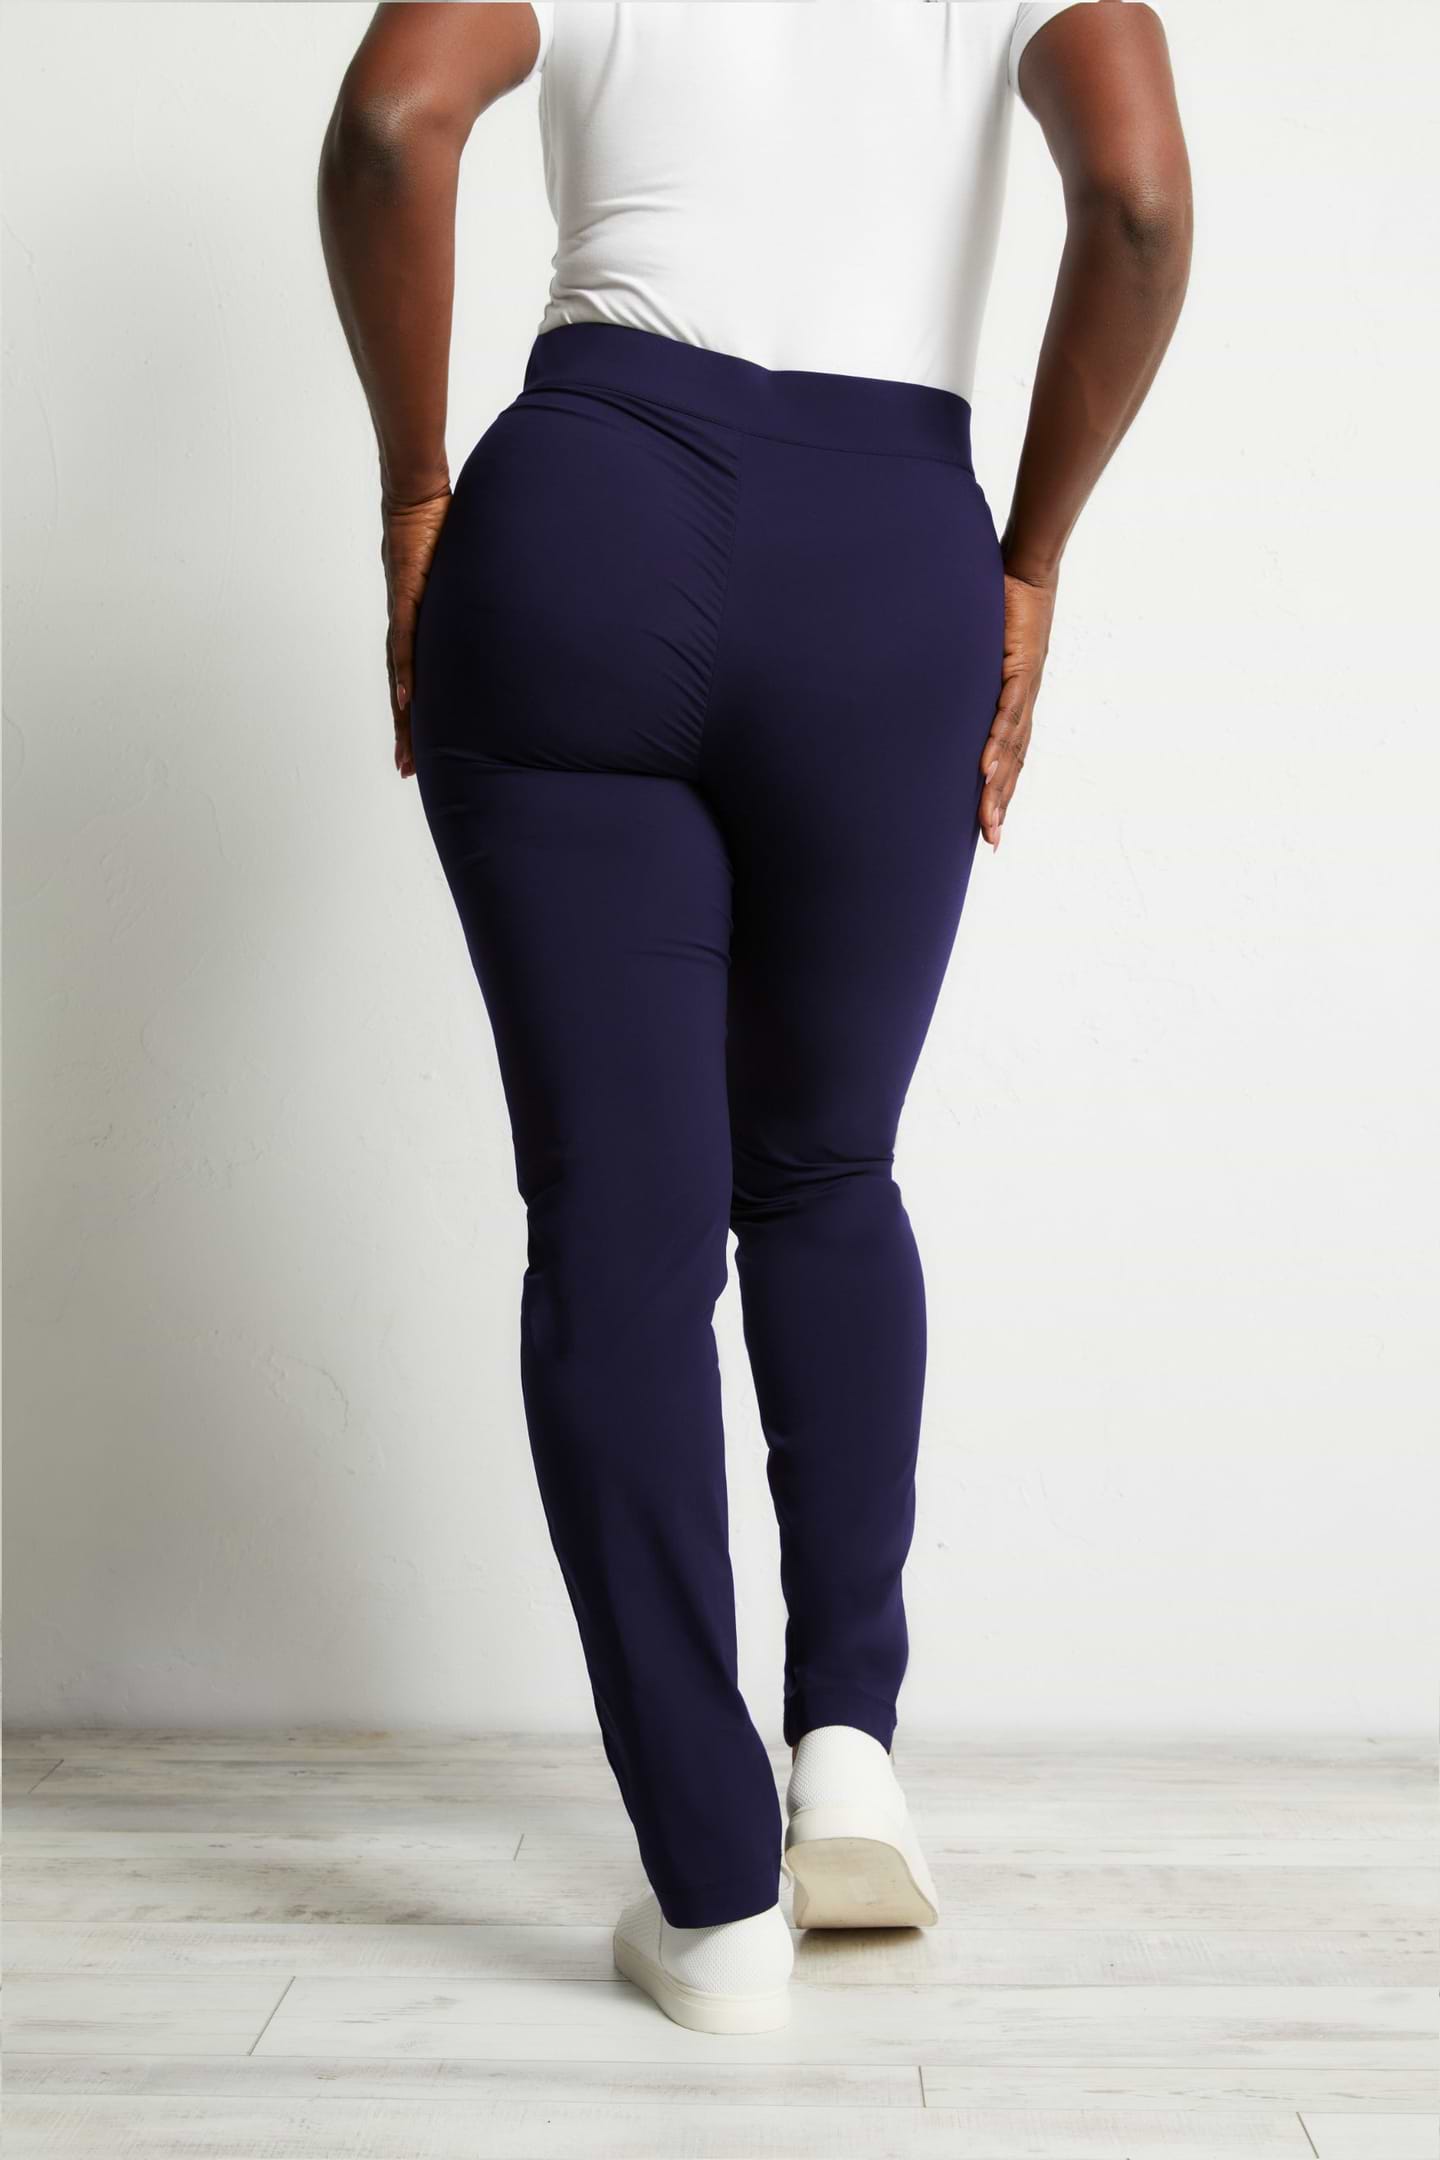 The Best Travel Pants. Back Profile of the Jamie Lee Pull-on Pant in Navy